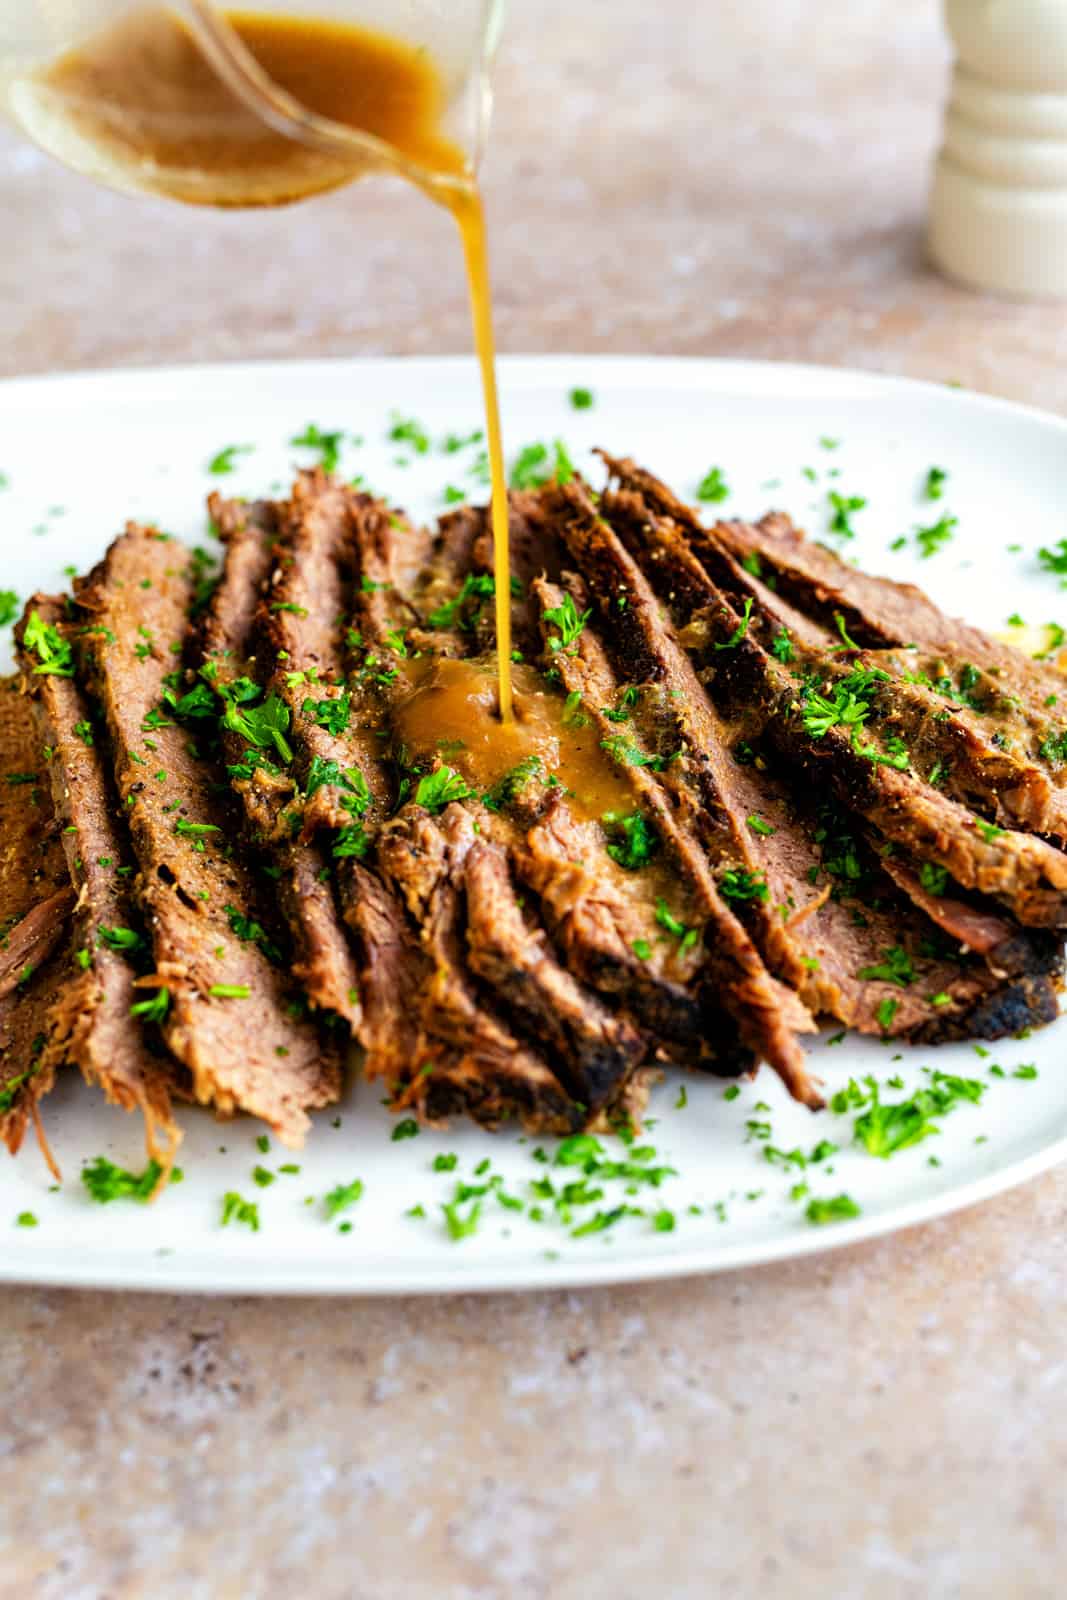 sliced beef brisket arranged on a platter and drizzled with gravy